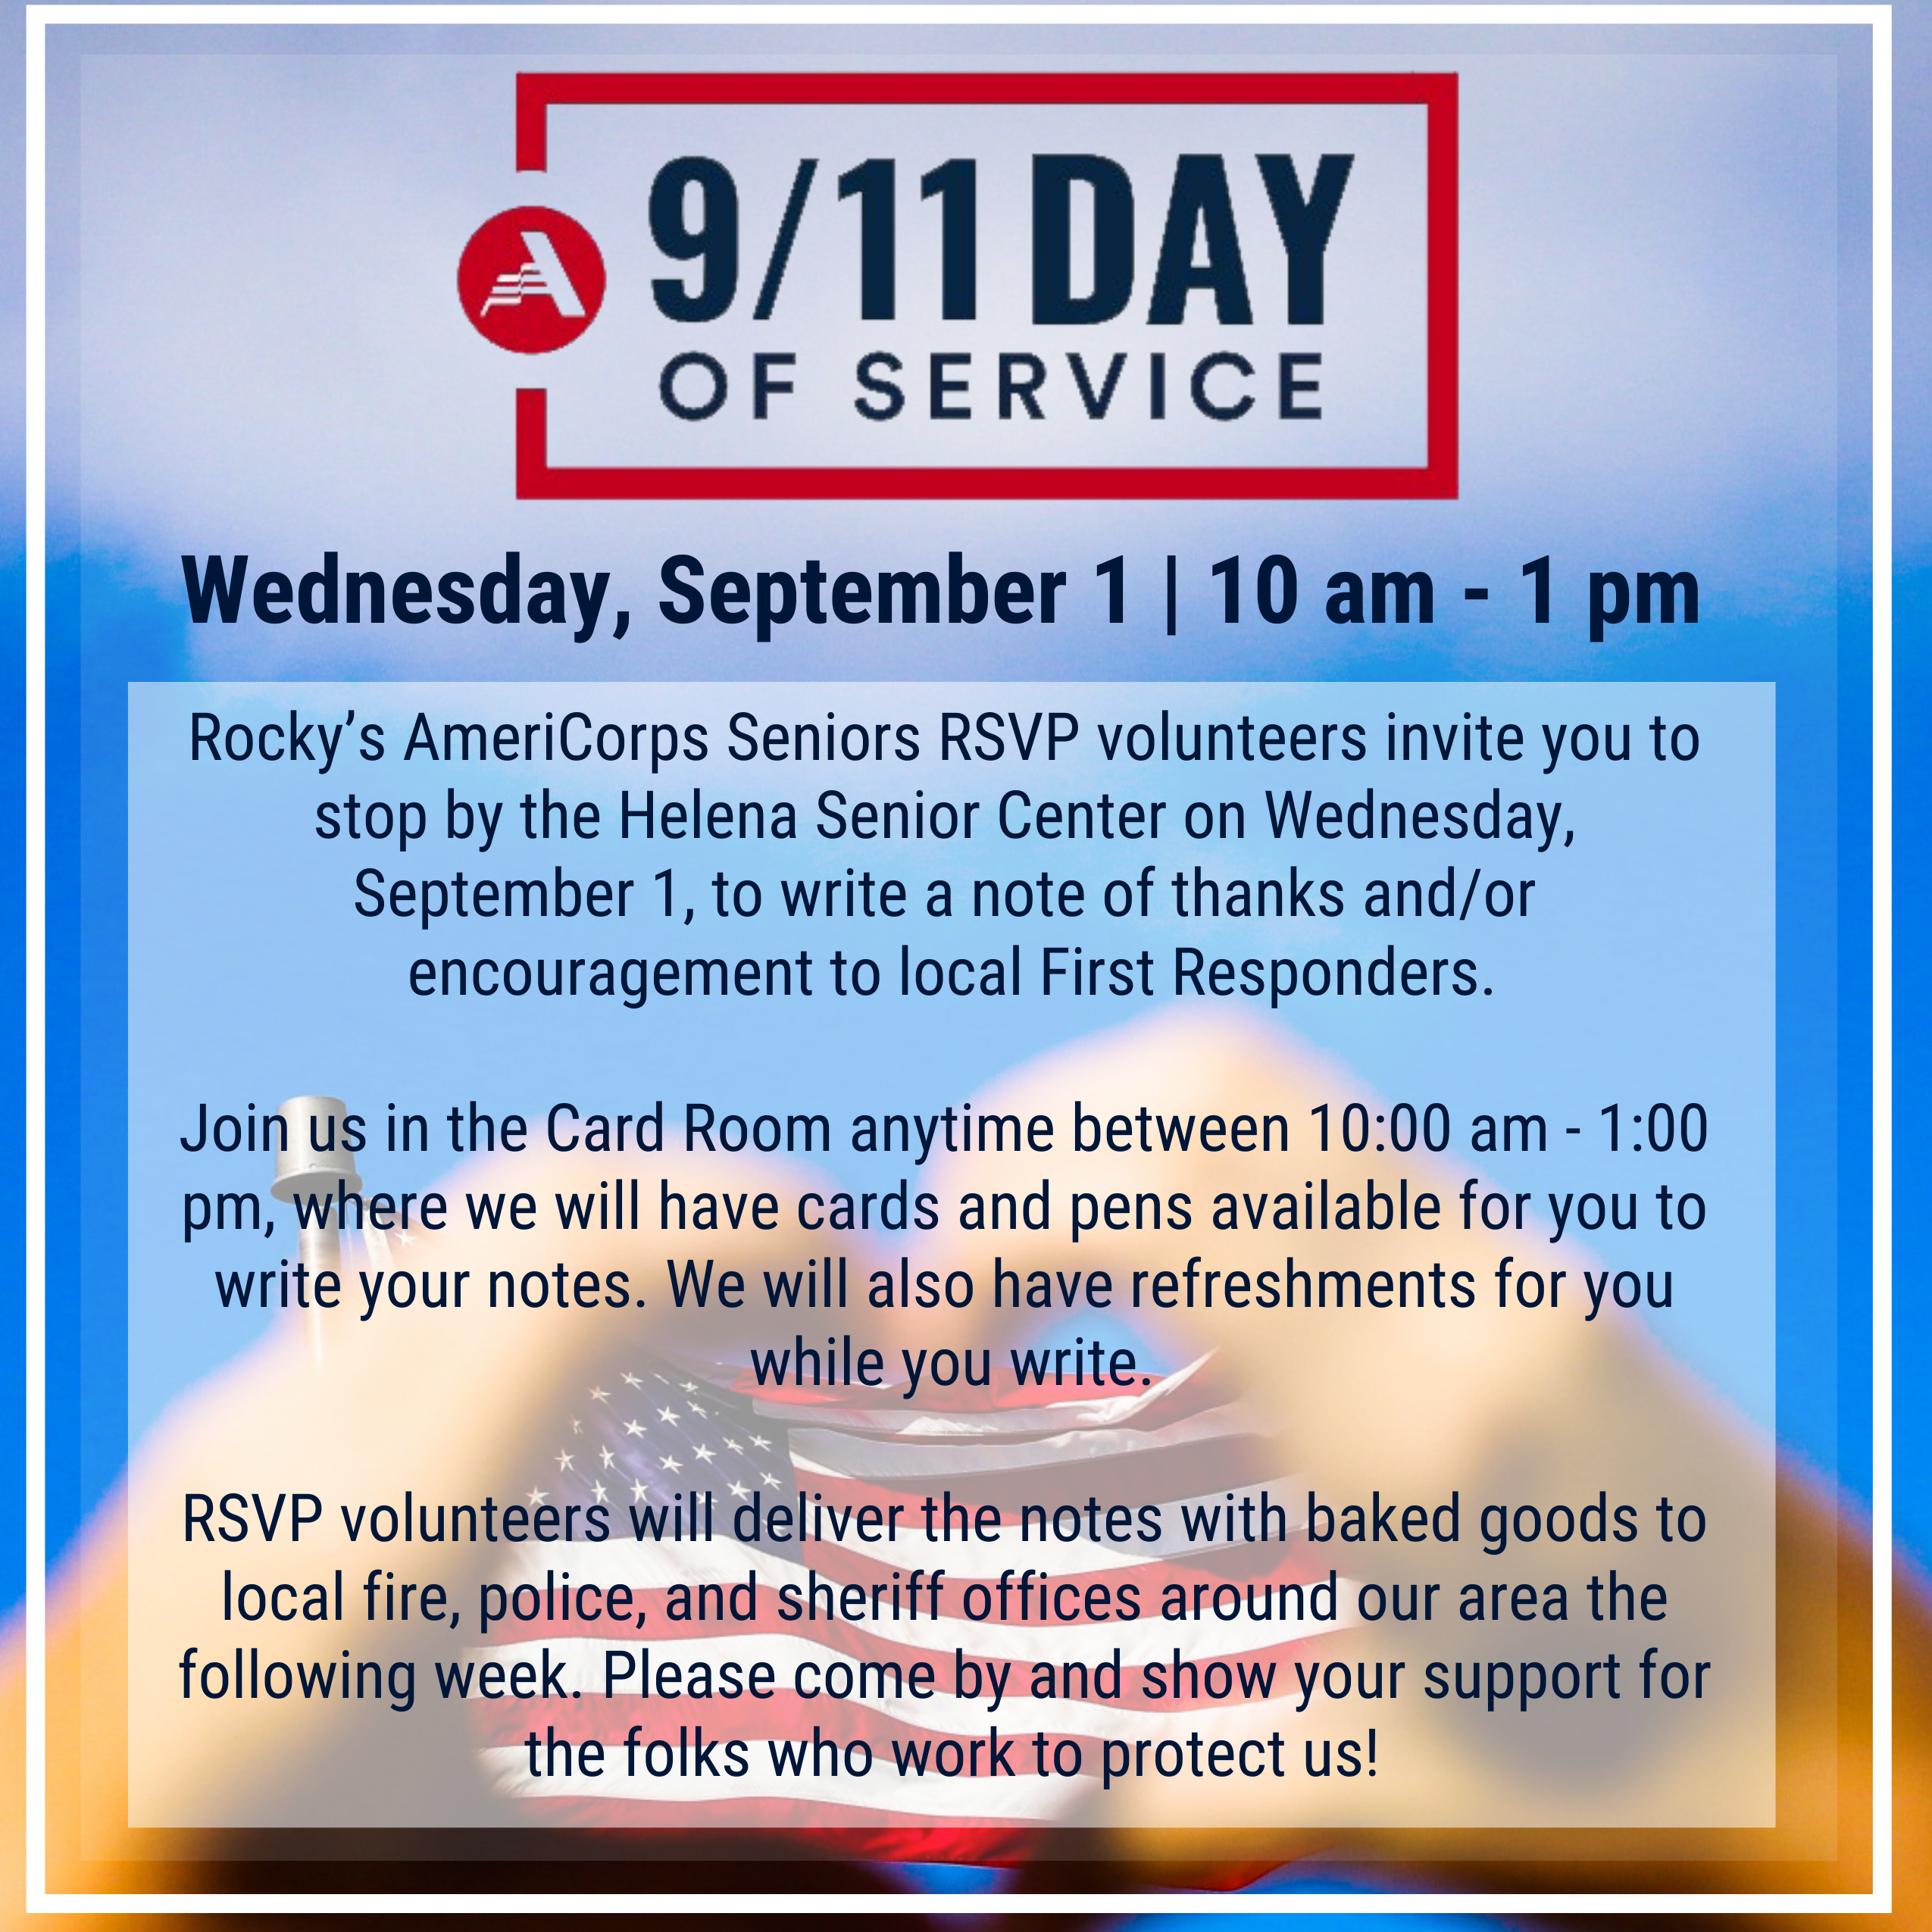 Rocky's RSVP Special Projects volunteers are inviting you to stop by the Helena Senior Center on Wednesday, September 1, to write a note of thanks and/or encouragement to local First Responders.